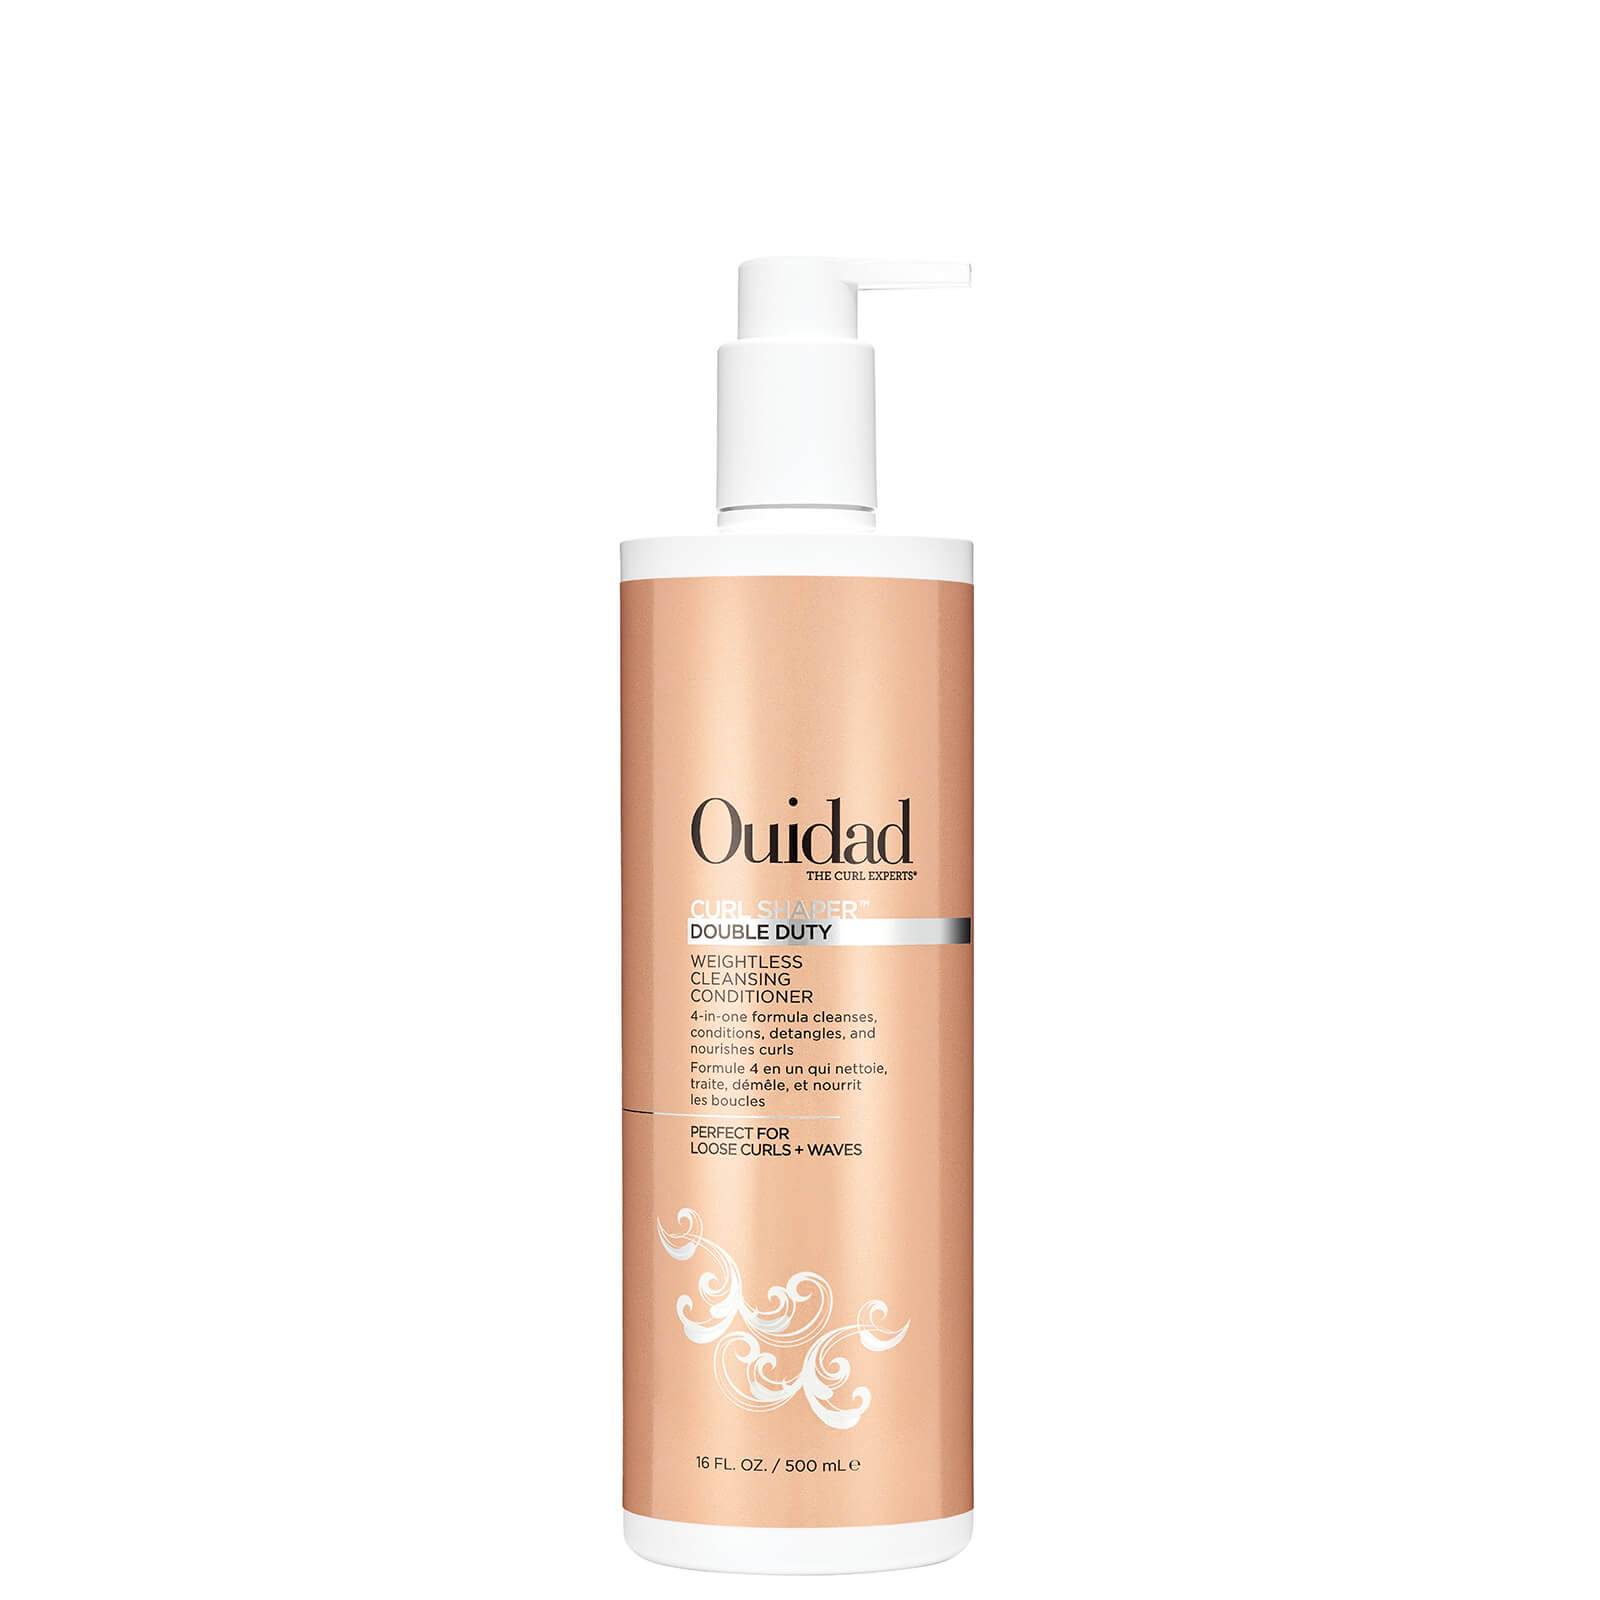 Ouidad Double Duty Weightless Cleansing Conditioner 500ml